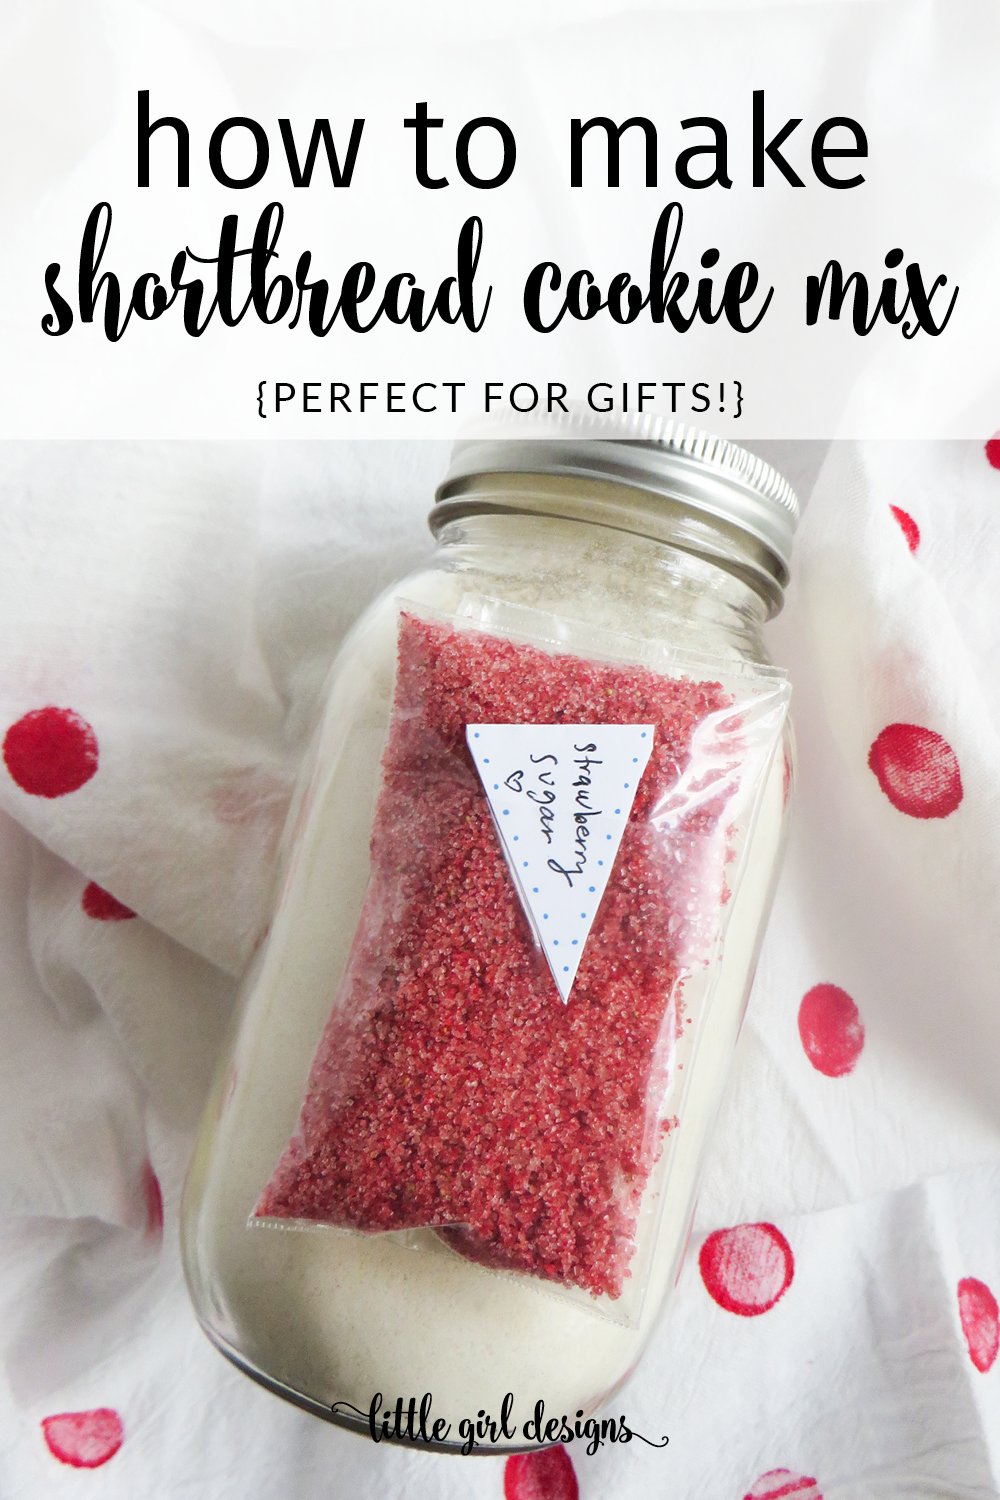 This shortbread cookie mix is such an easy mason jar gift idea! You just need a few ingredients too!